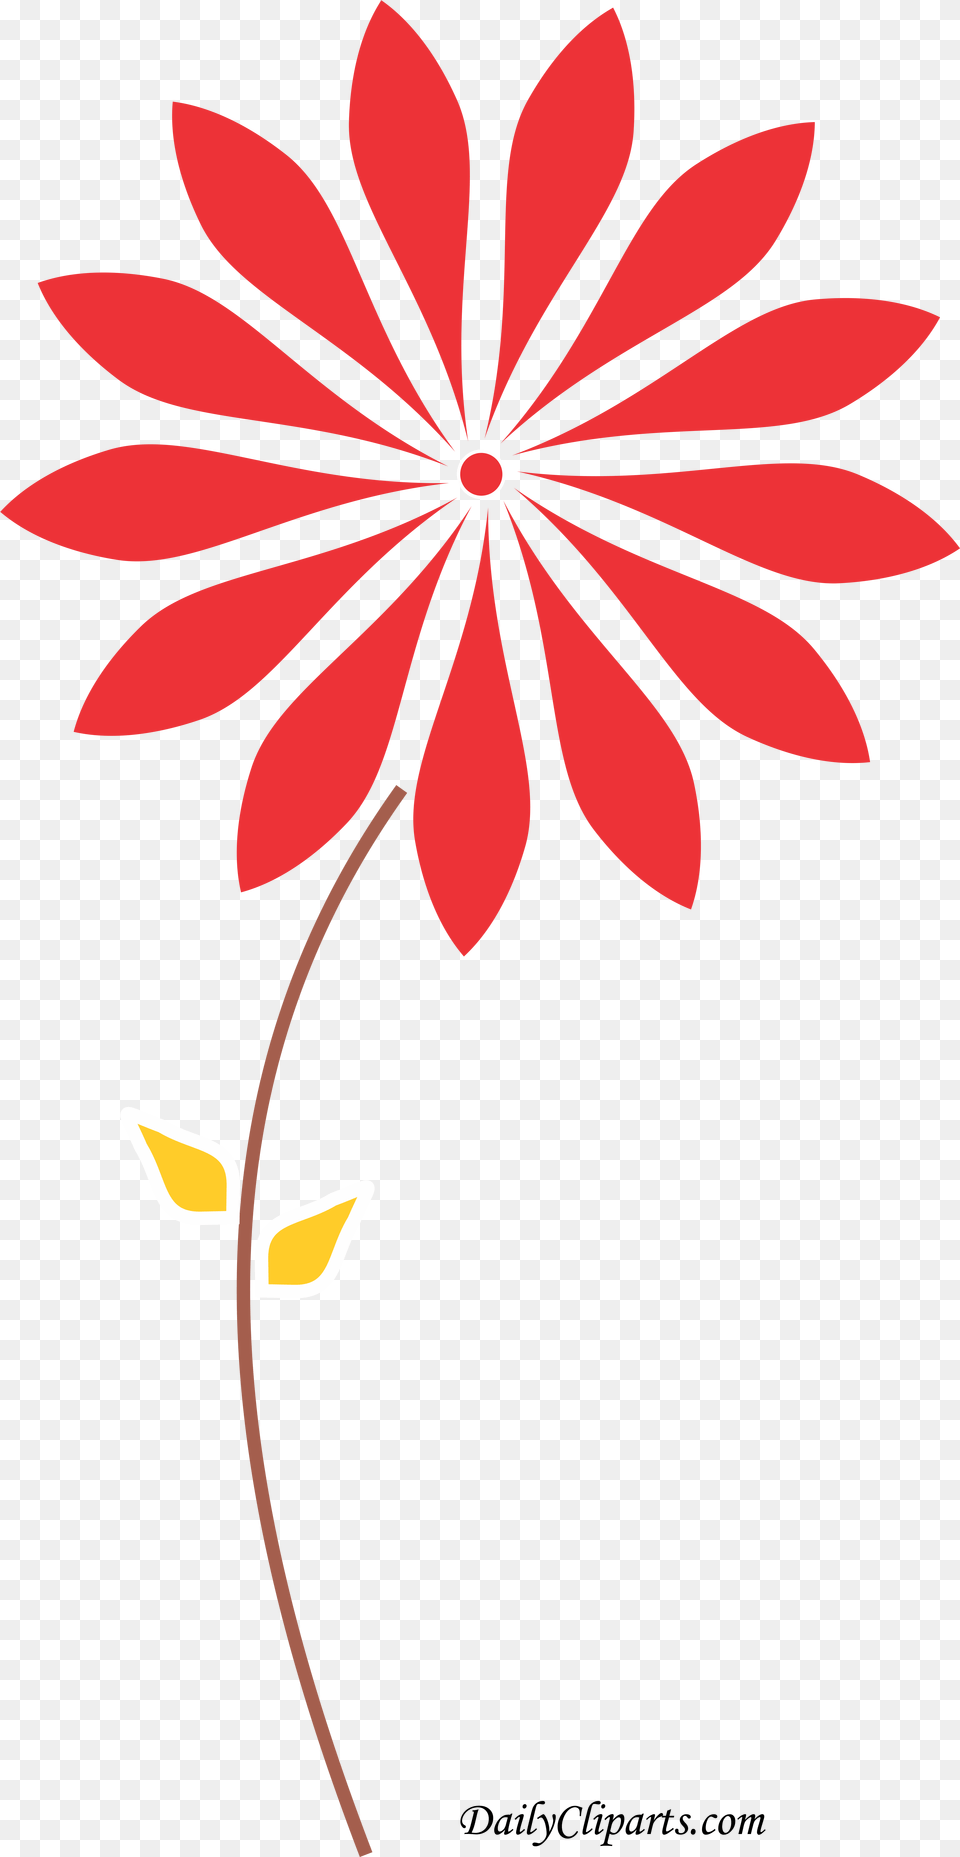 Red Flower Yellow Leaves Brown Stem Clipart Icon Daily Daisy Flower Cut Out, Art, Plant, Floral Design, Petal Png